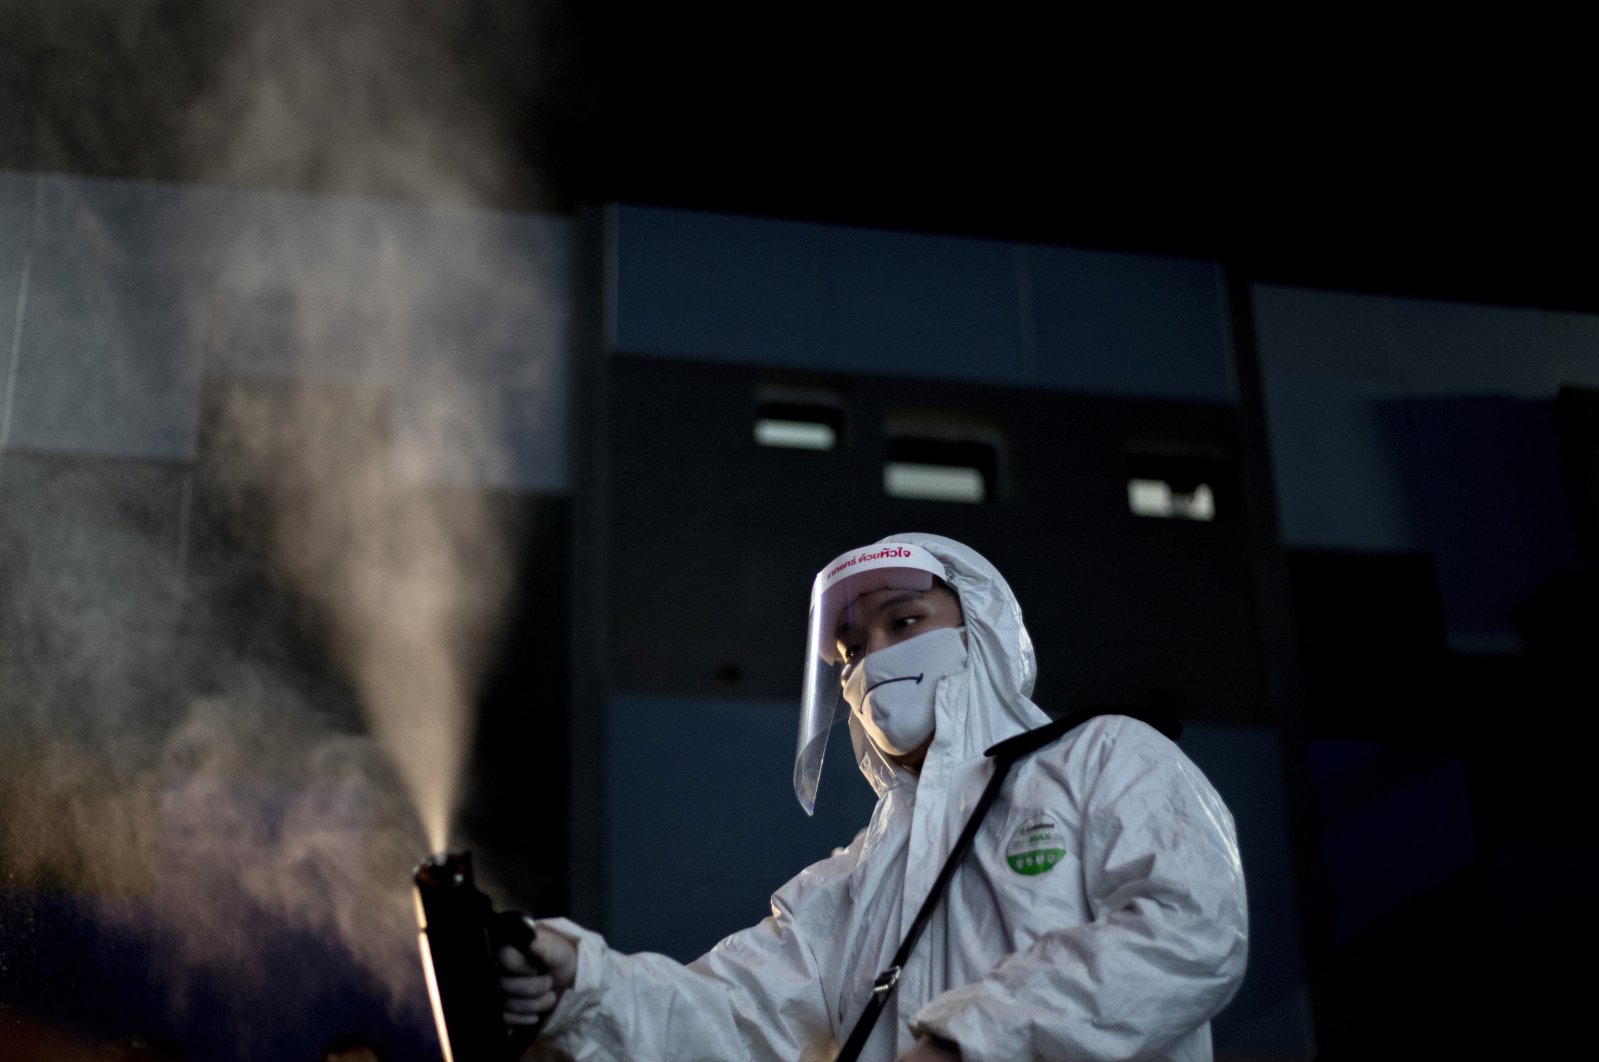 An employee sprays disinfectant as a precaution against the coronavirus at the Paragon Cineplex movie theater in Bangkok, Thailand, Monday, June 1, 2020. (AP Photo)